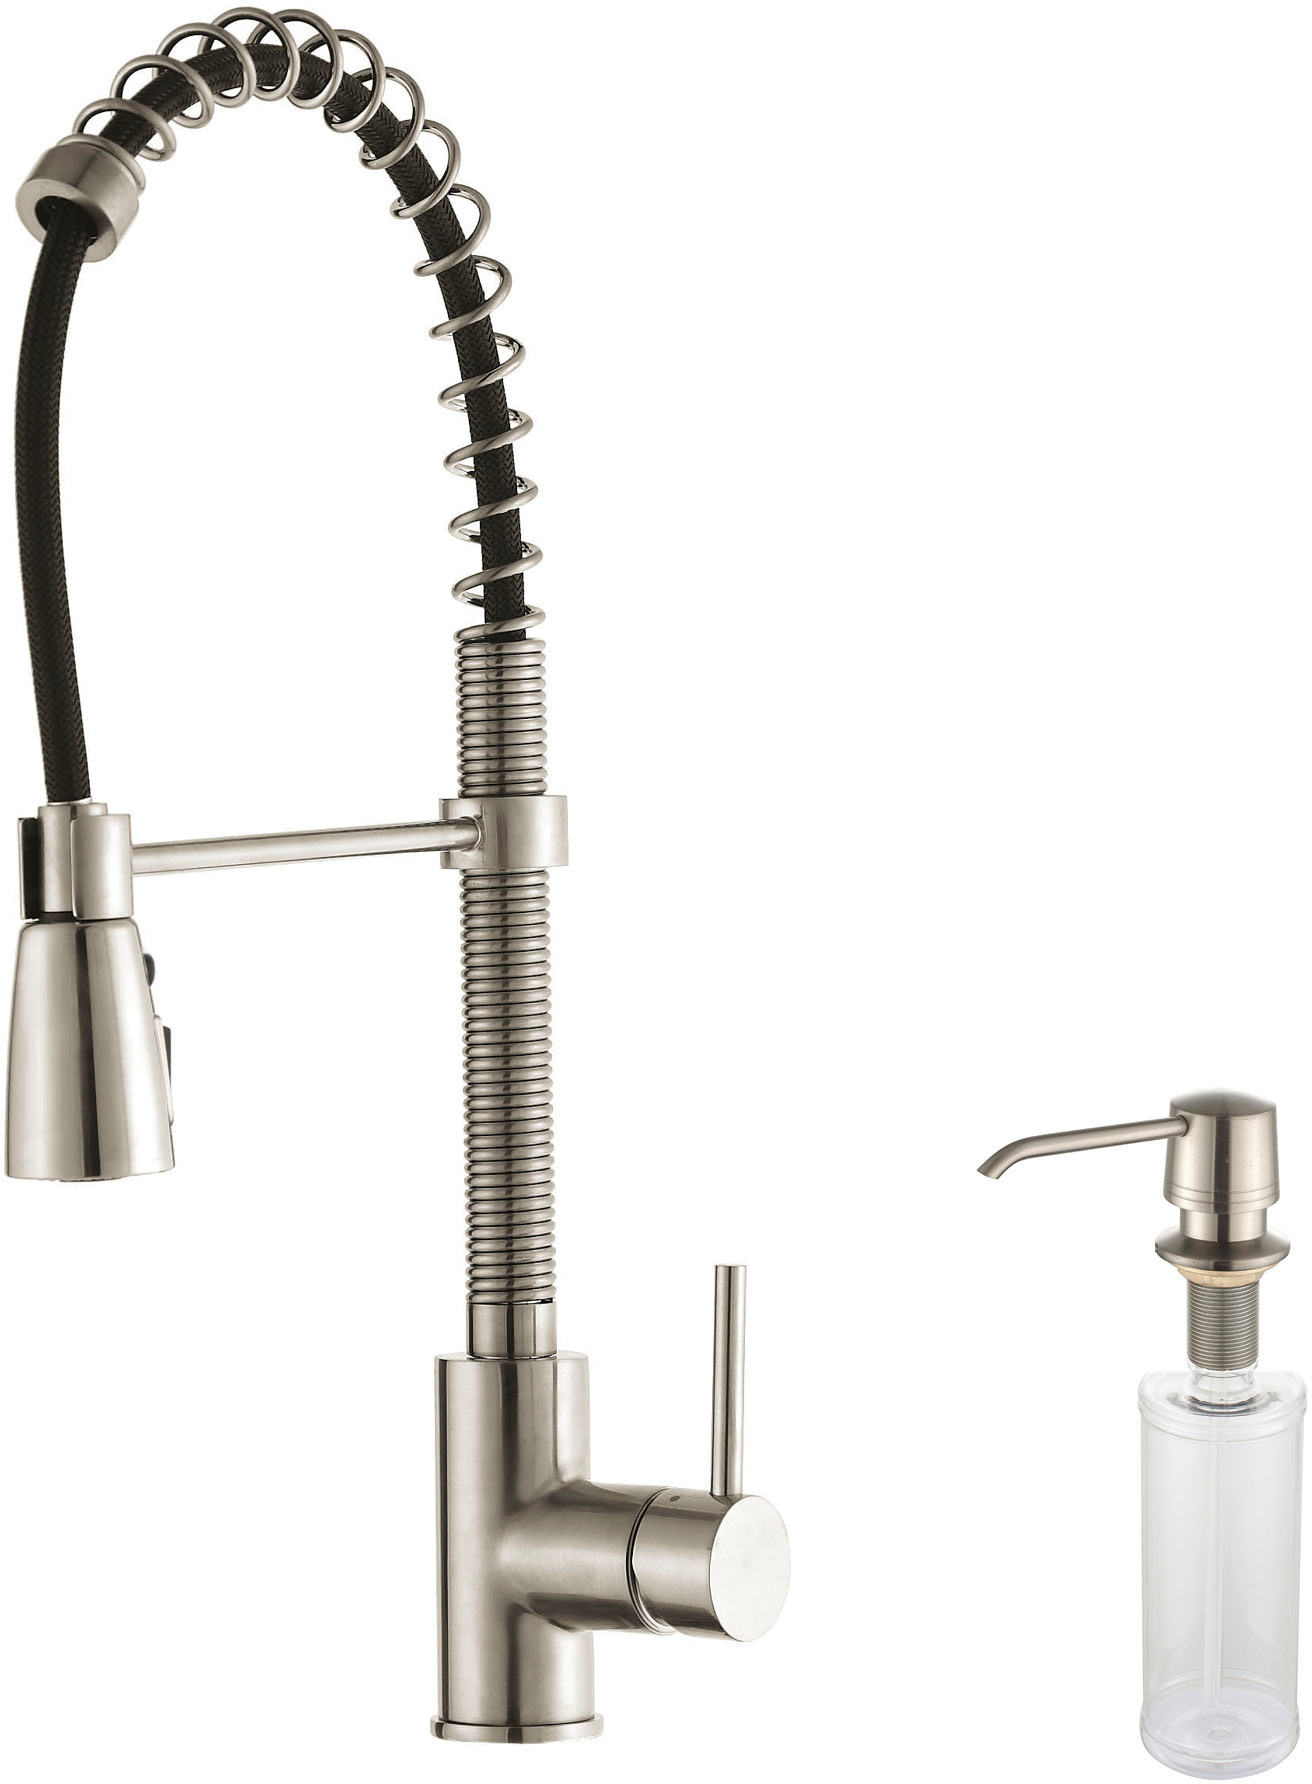 Kraus Kpf1612ksd30ss Single Lever Spiral Spring Kitchen Faucet With Hi Arc Spray Head 2 2 Gpm Flow Rate Drip Free Ceramic Cartridge And Chrome Soap Dispenser